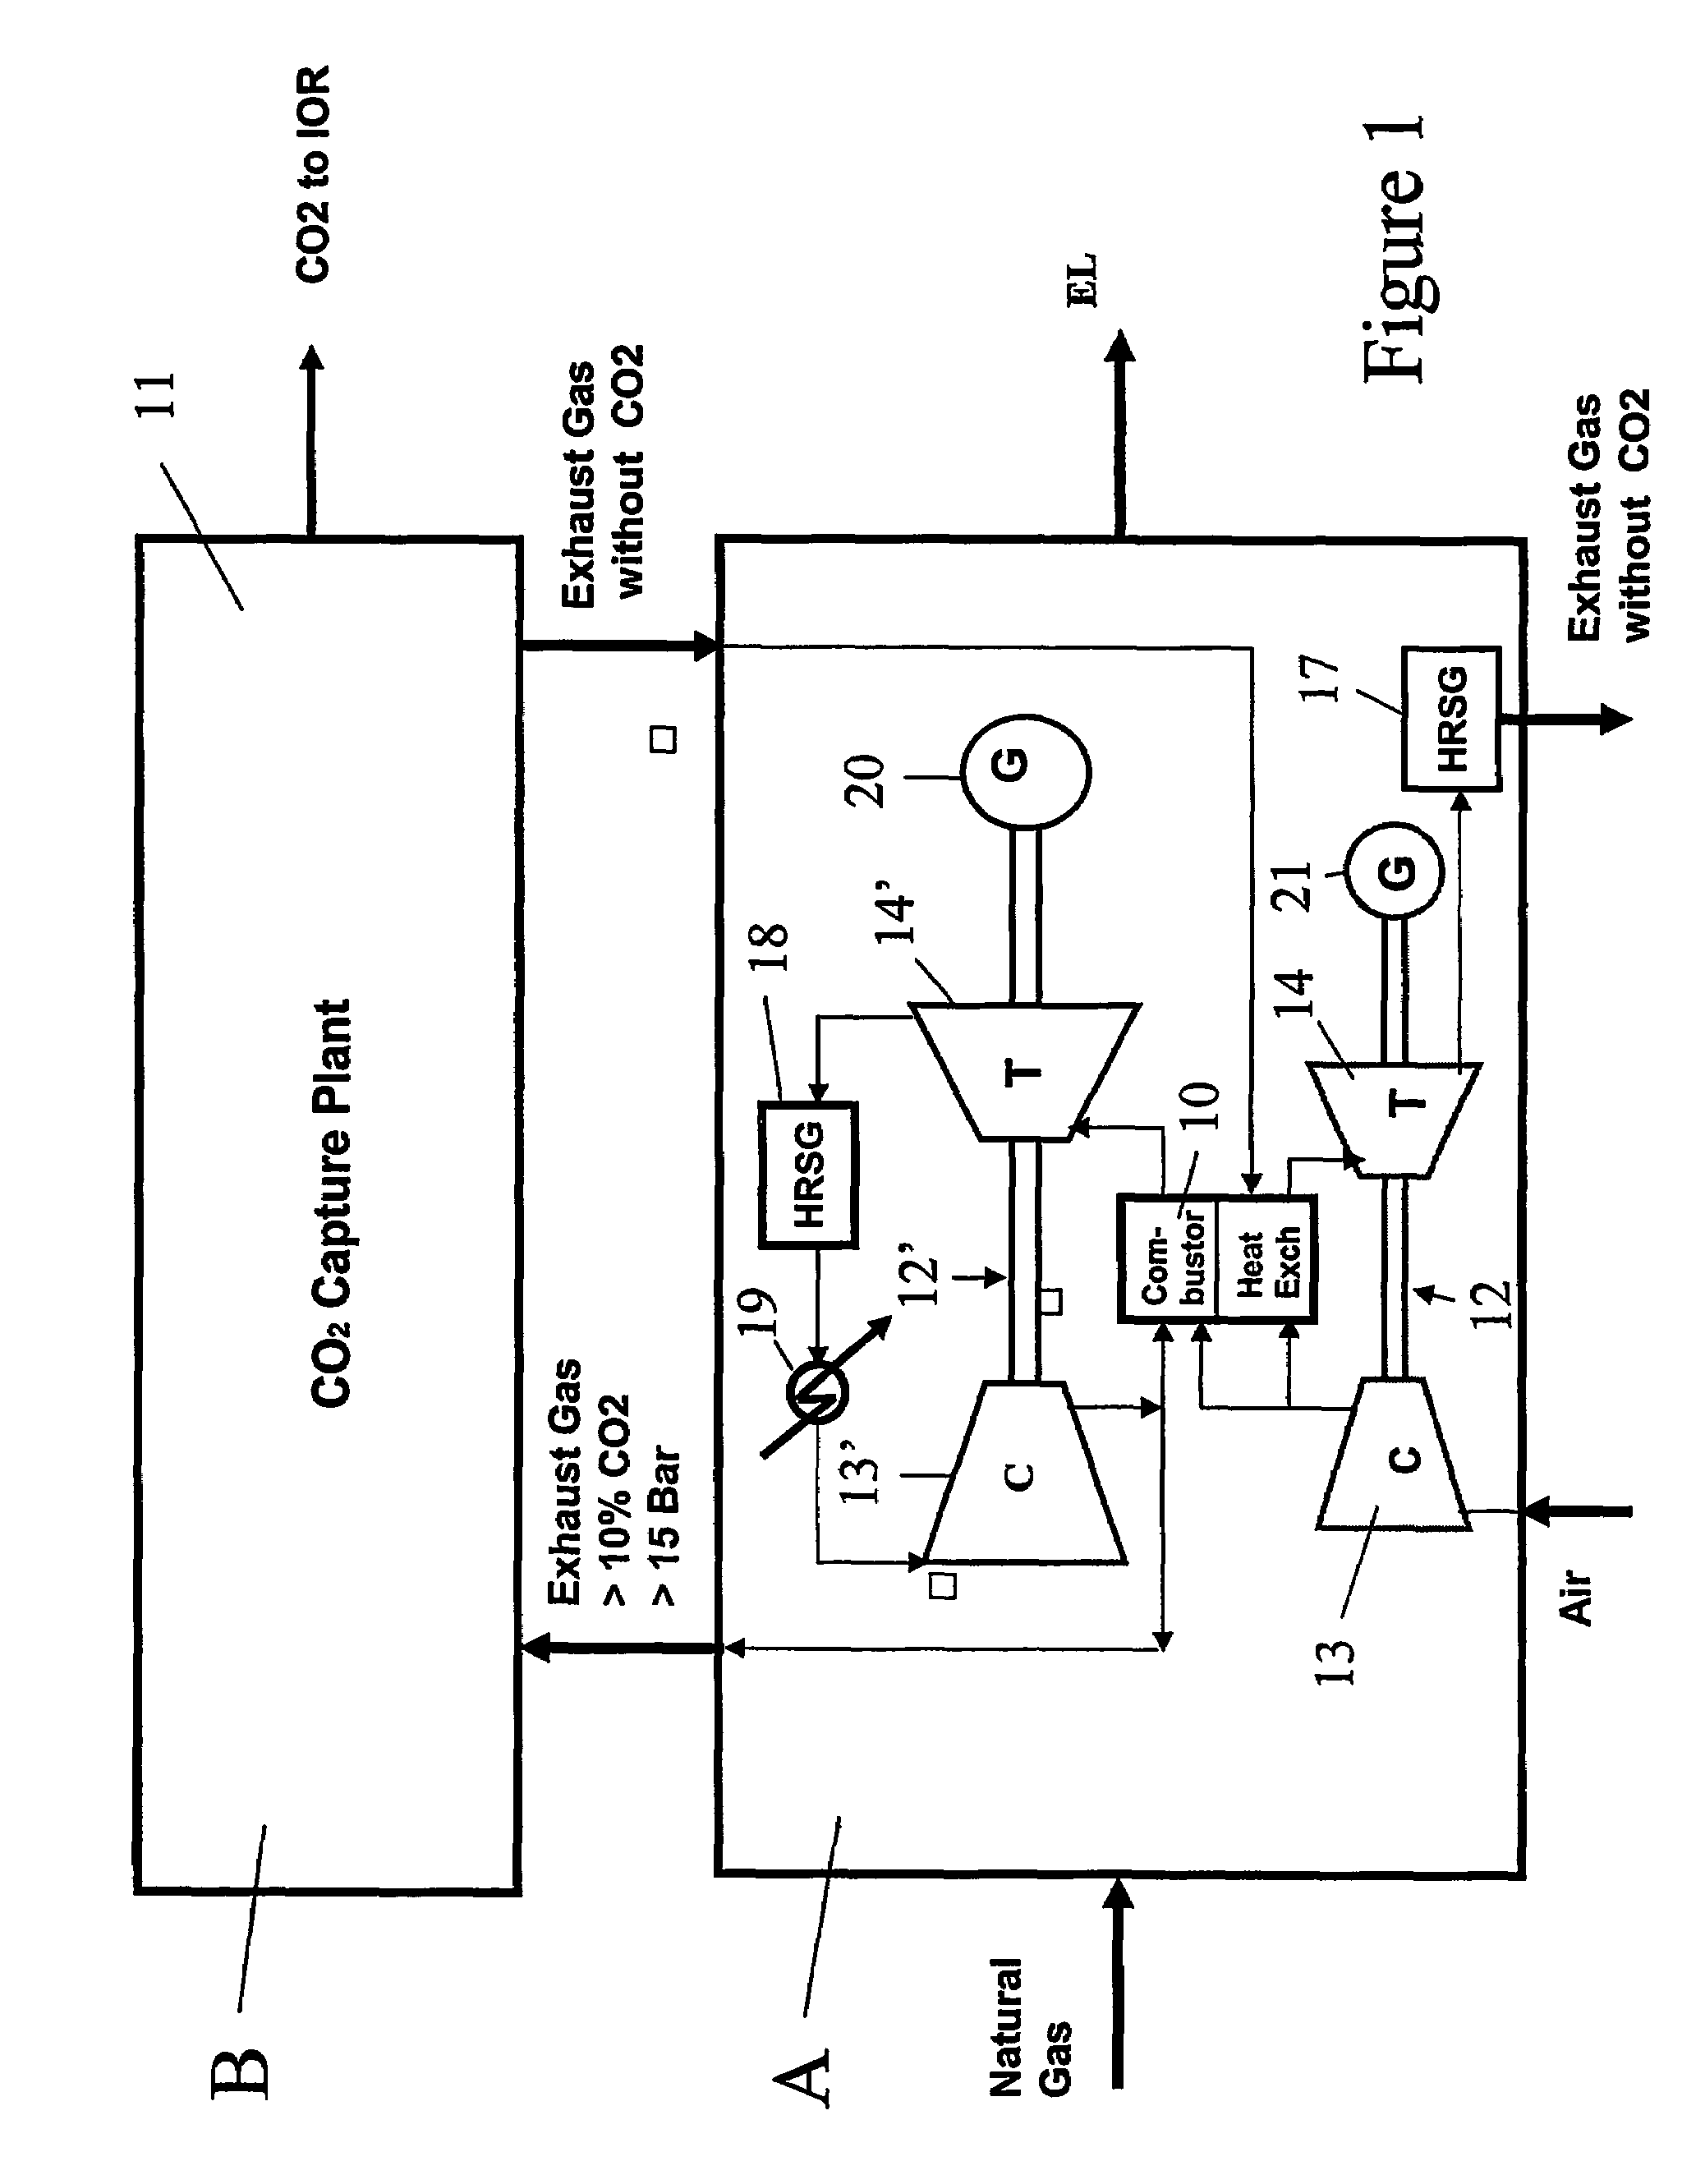 Efficient combined cycle power plant with CO2 capture and a combustor arrangement with separate flows